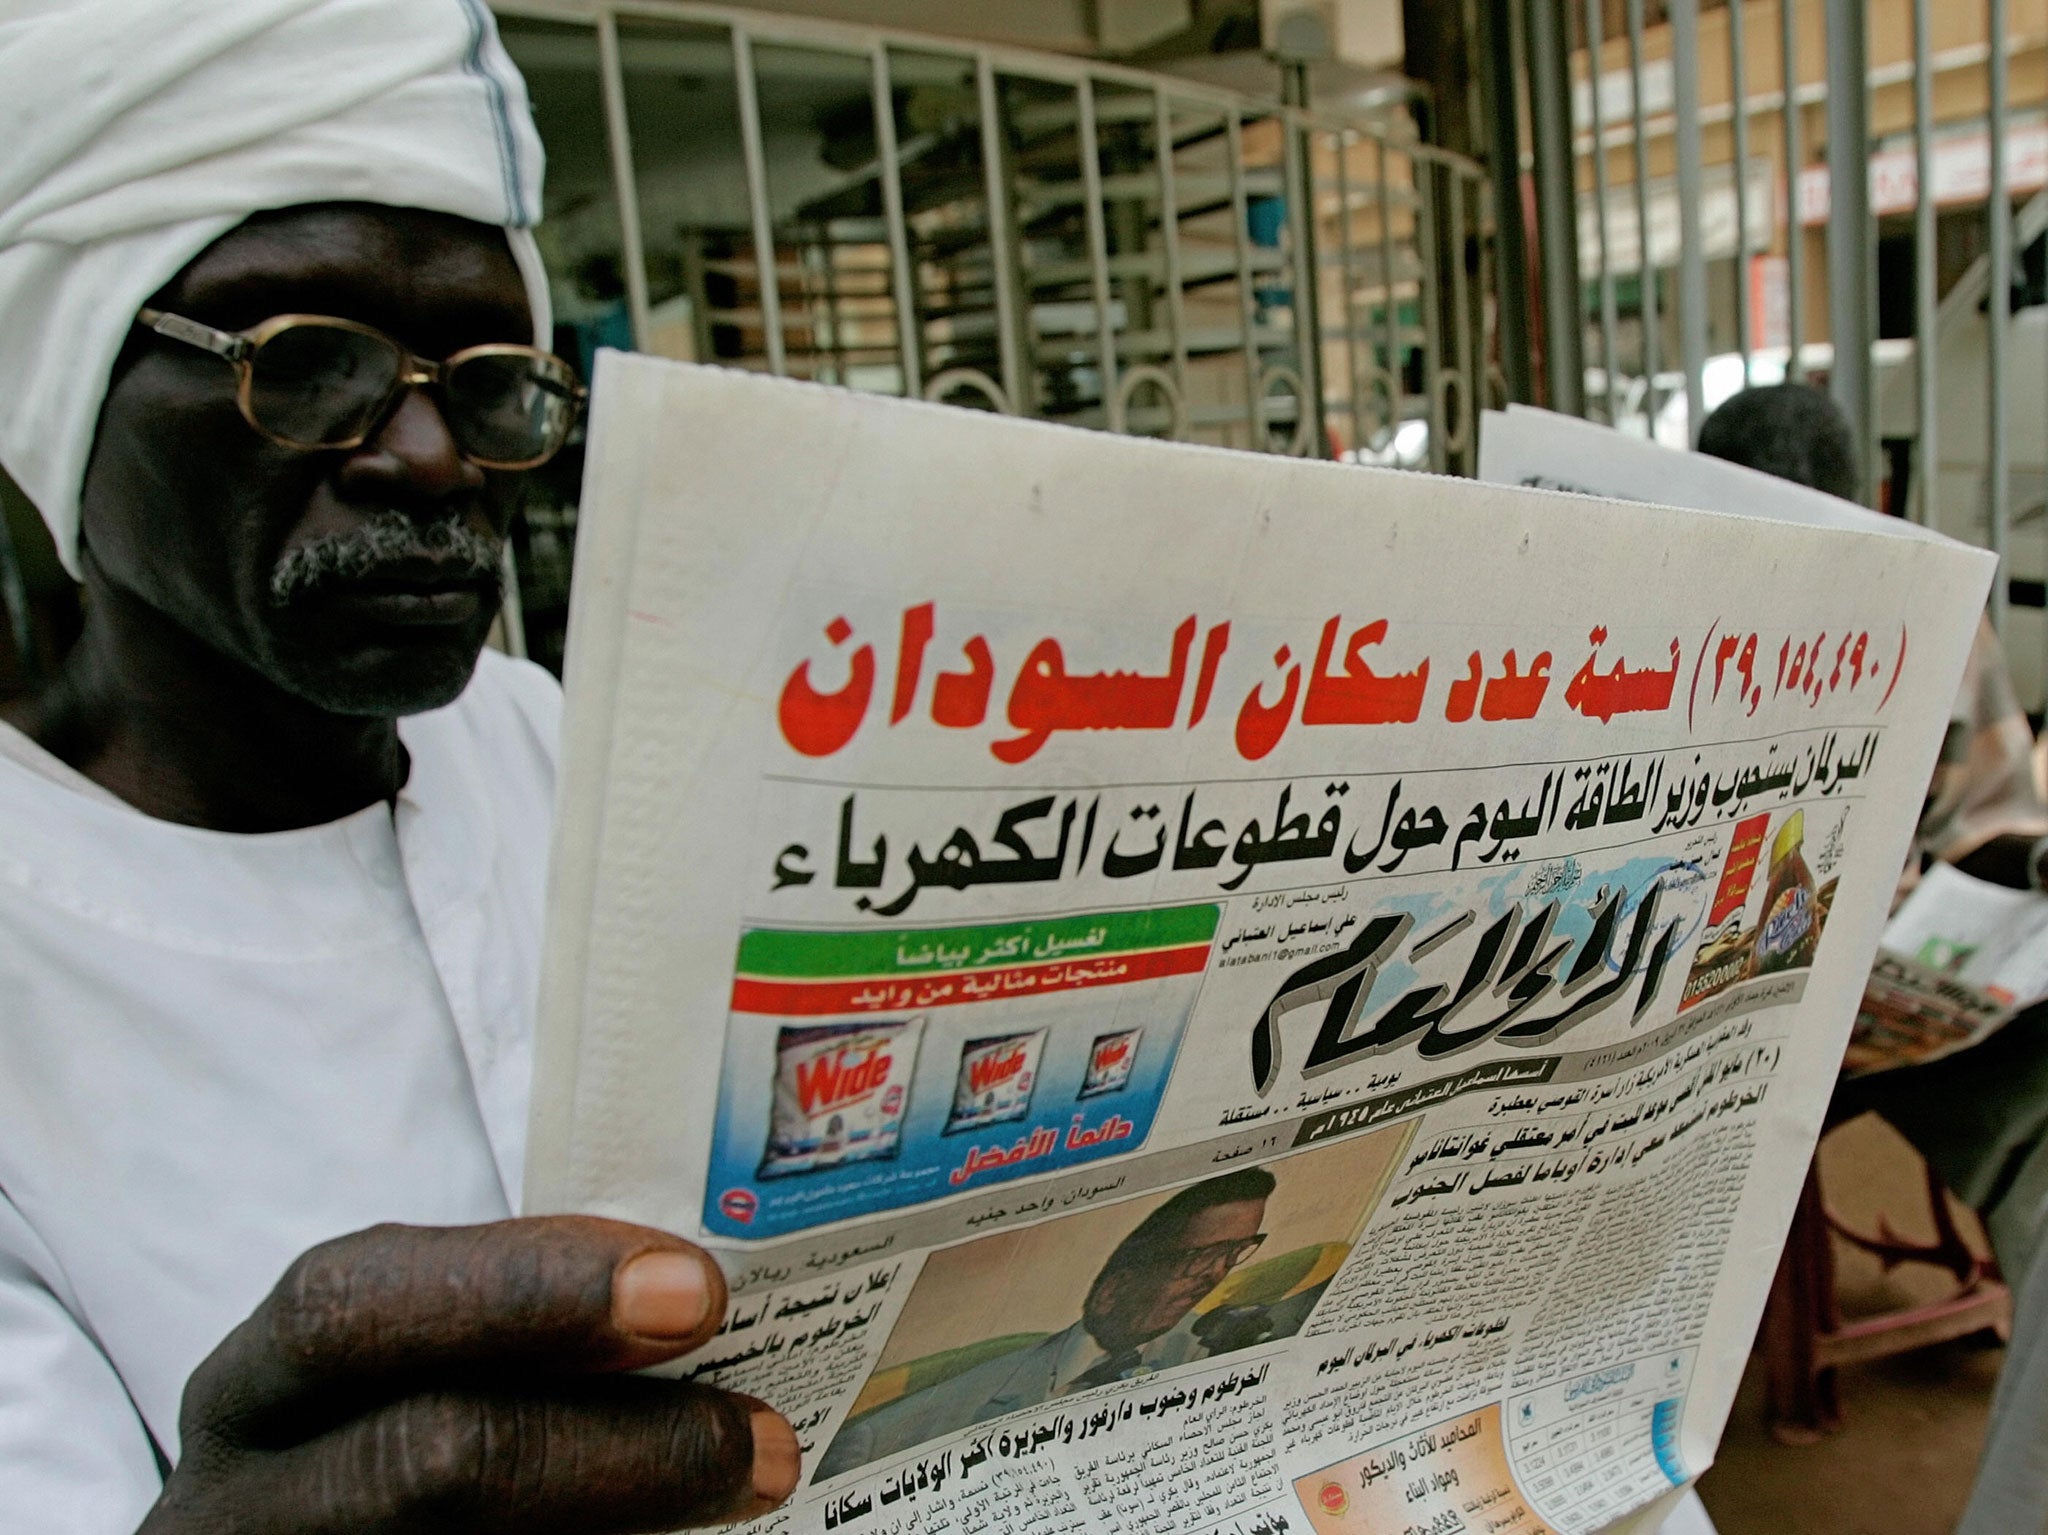 Sudanese men read local Arabic newspapers outside a shop in Khartoum on April 27, 2009.